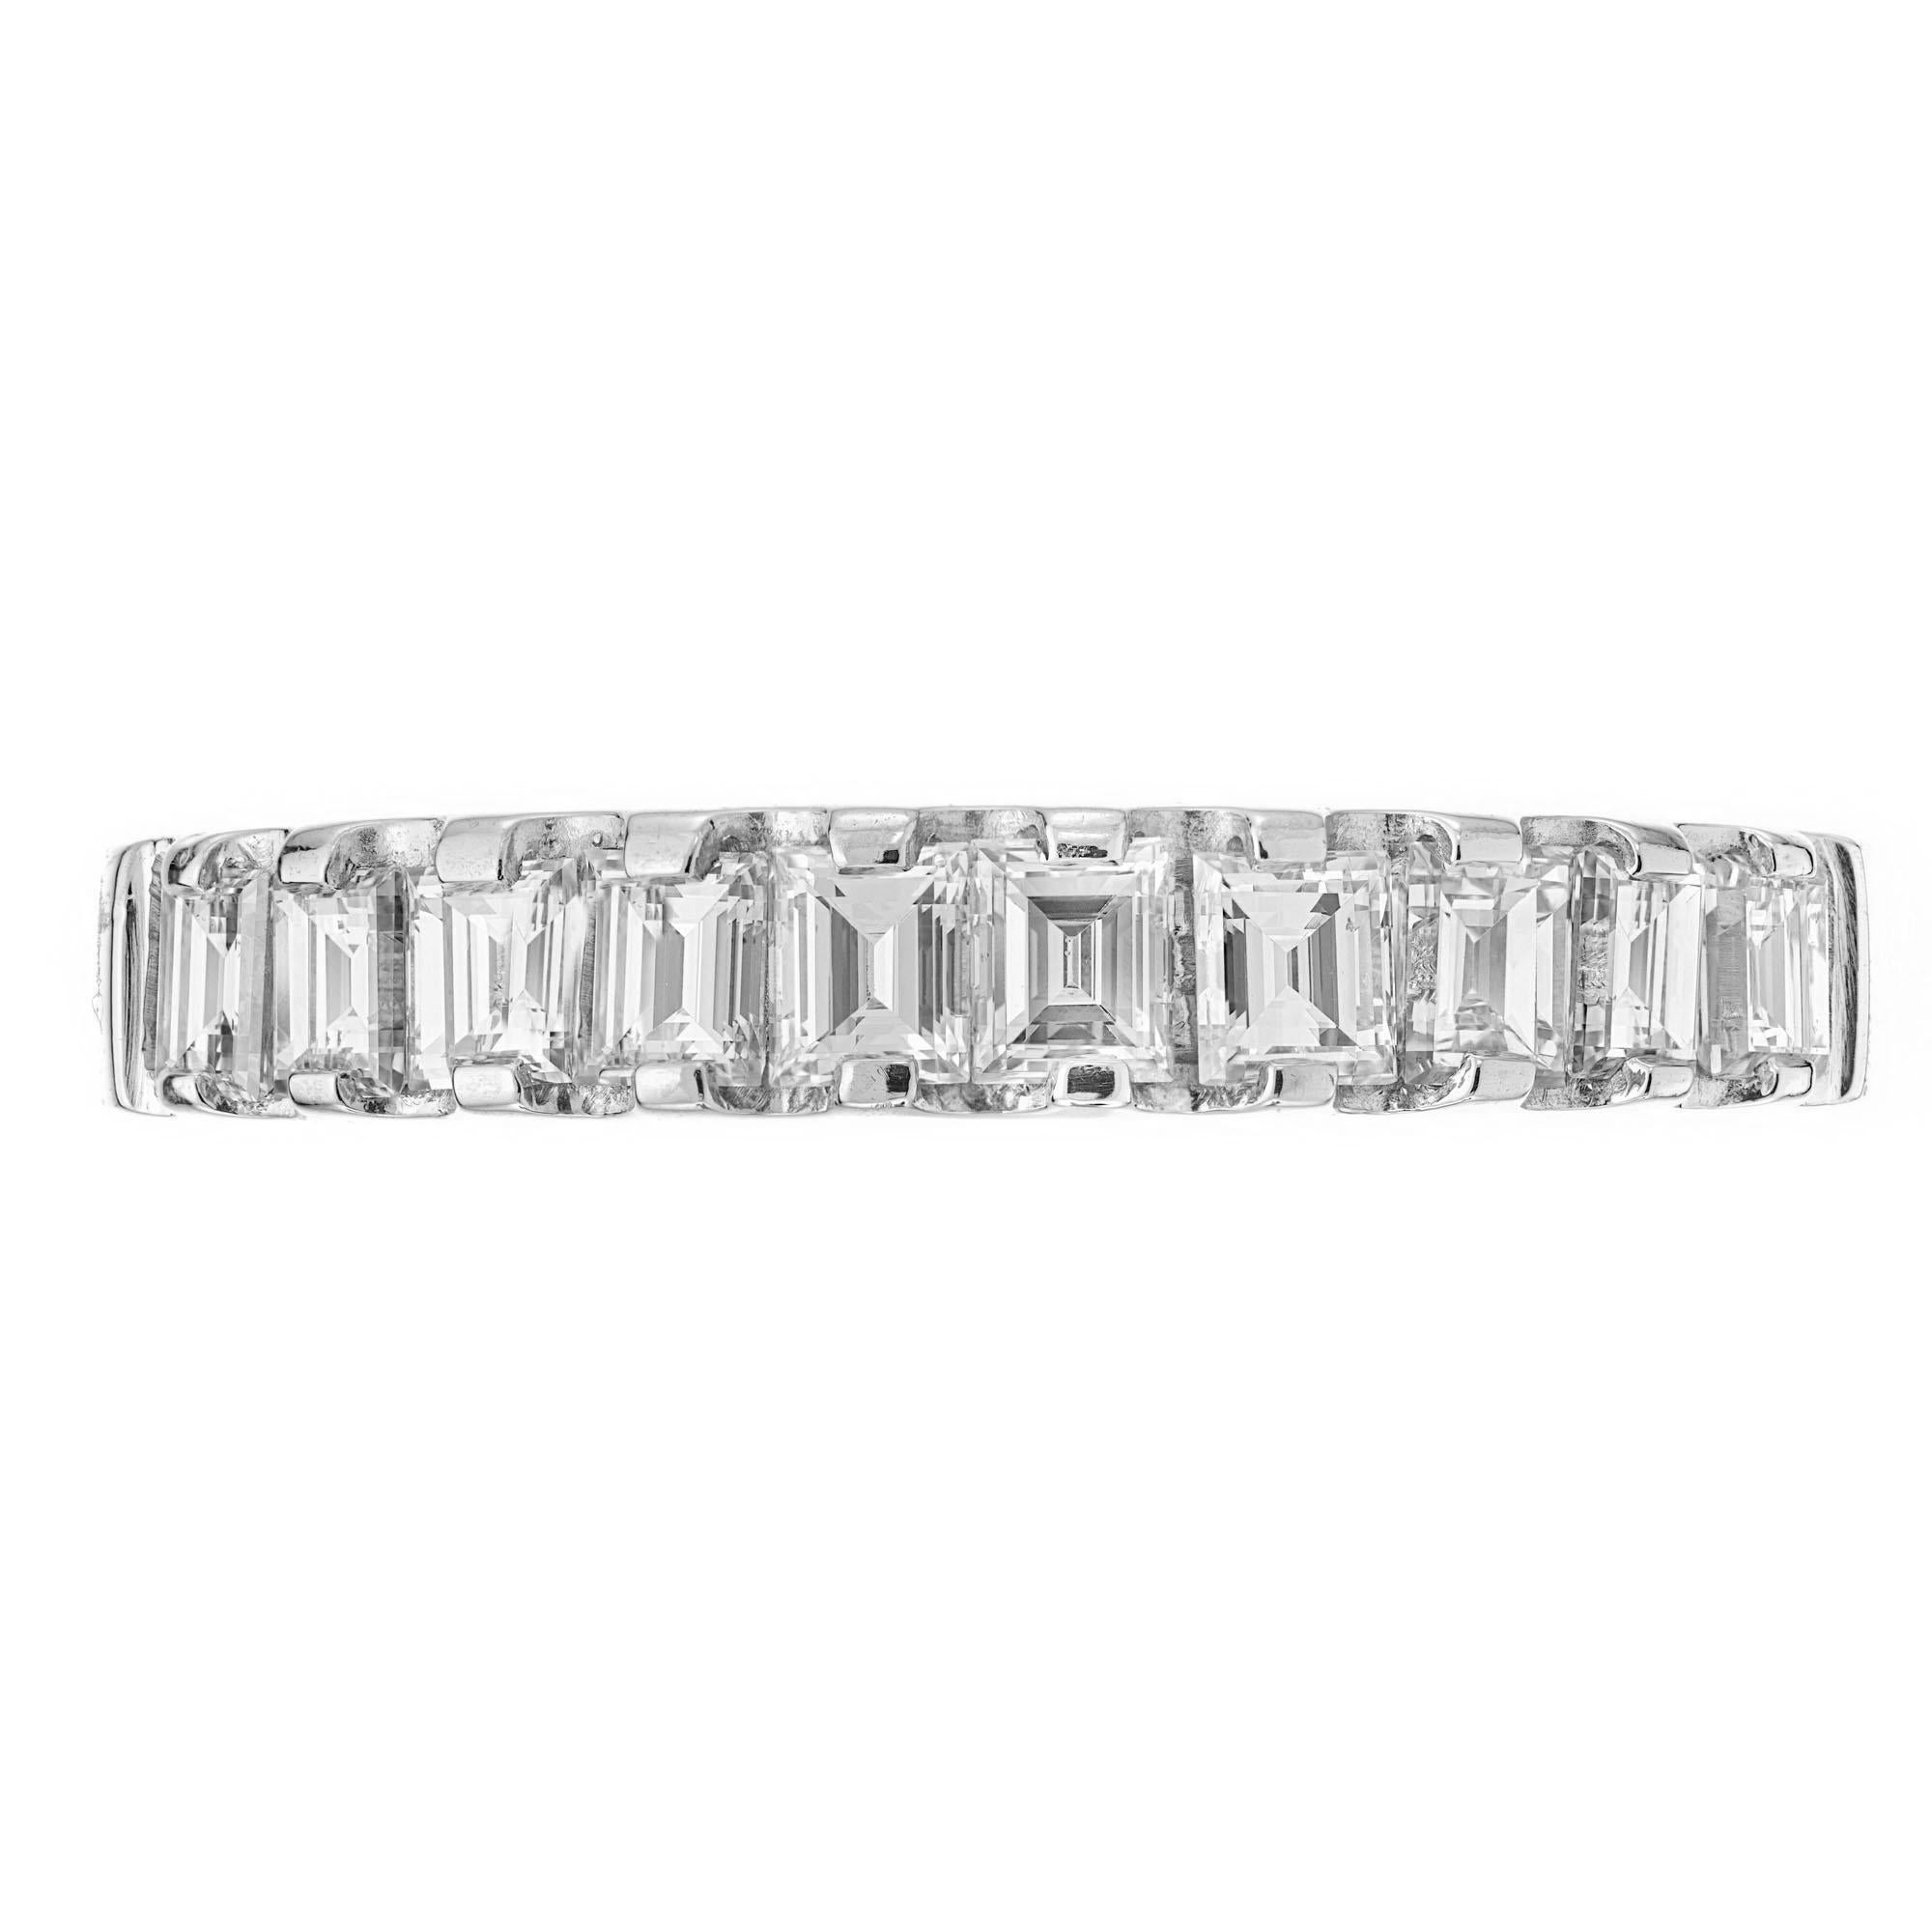 1950's late Art Deco Style 10 square step cut diamond wedding band ring, .75cts. set in platinum.

10 square step cut diamonds, G-H VS approx. .75cts
Size 5.5 and sizable 
Platinum 
4.8 grams
Width at top: 3.5mm
Height at top: 2.7mm
Width at bottom: